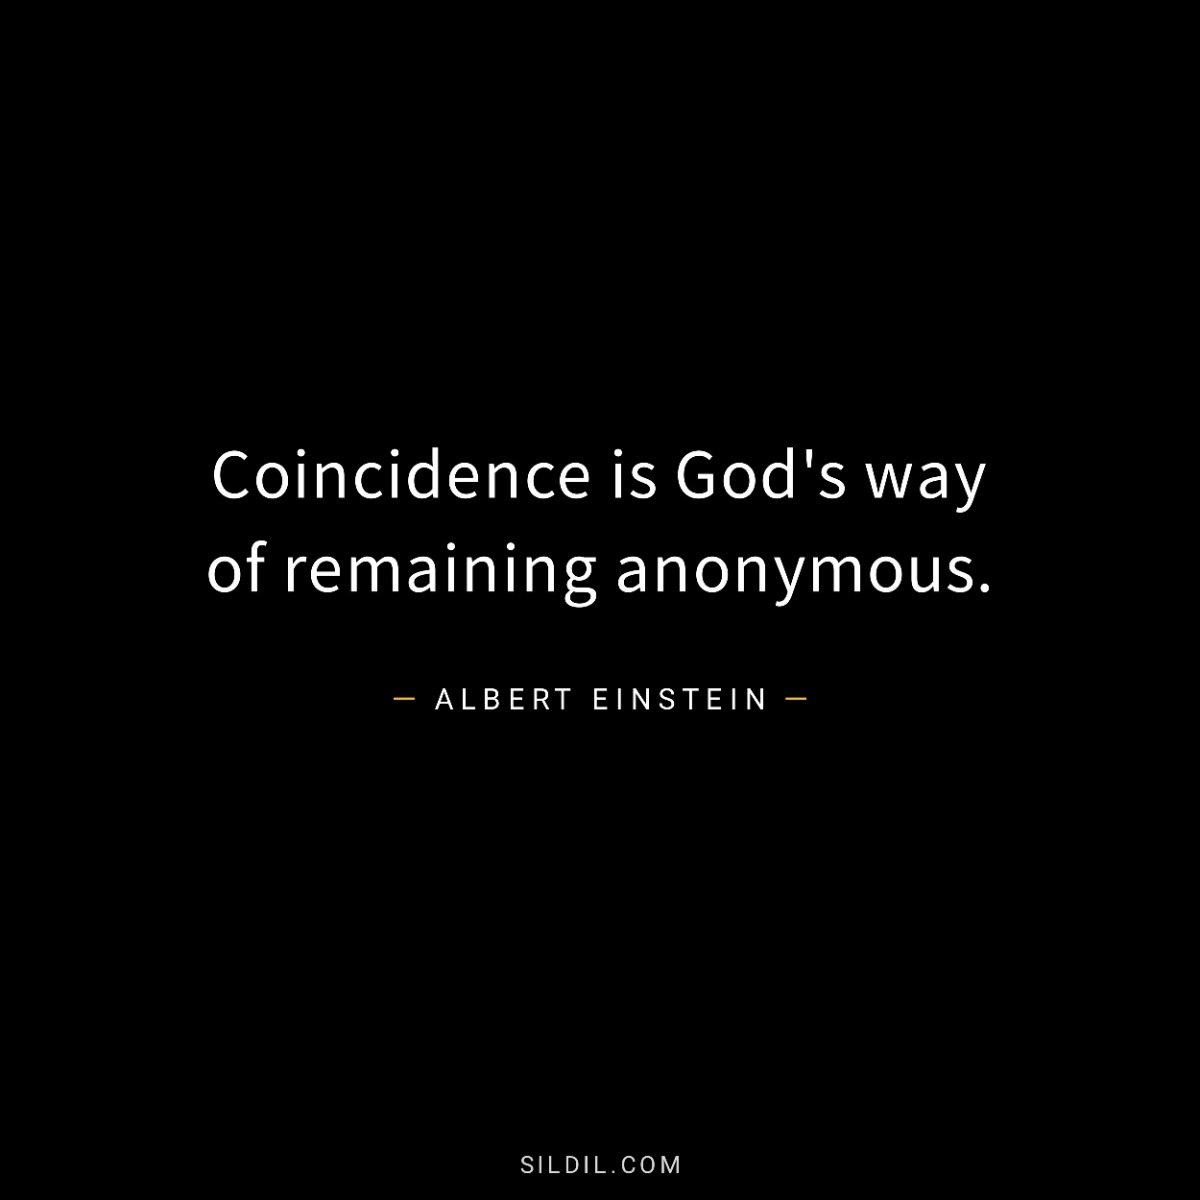 Coincidence is God's way of remaining anonymous.